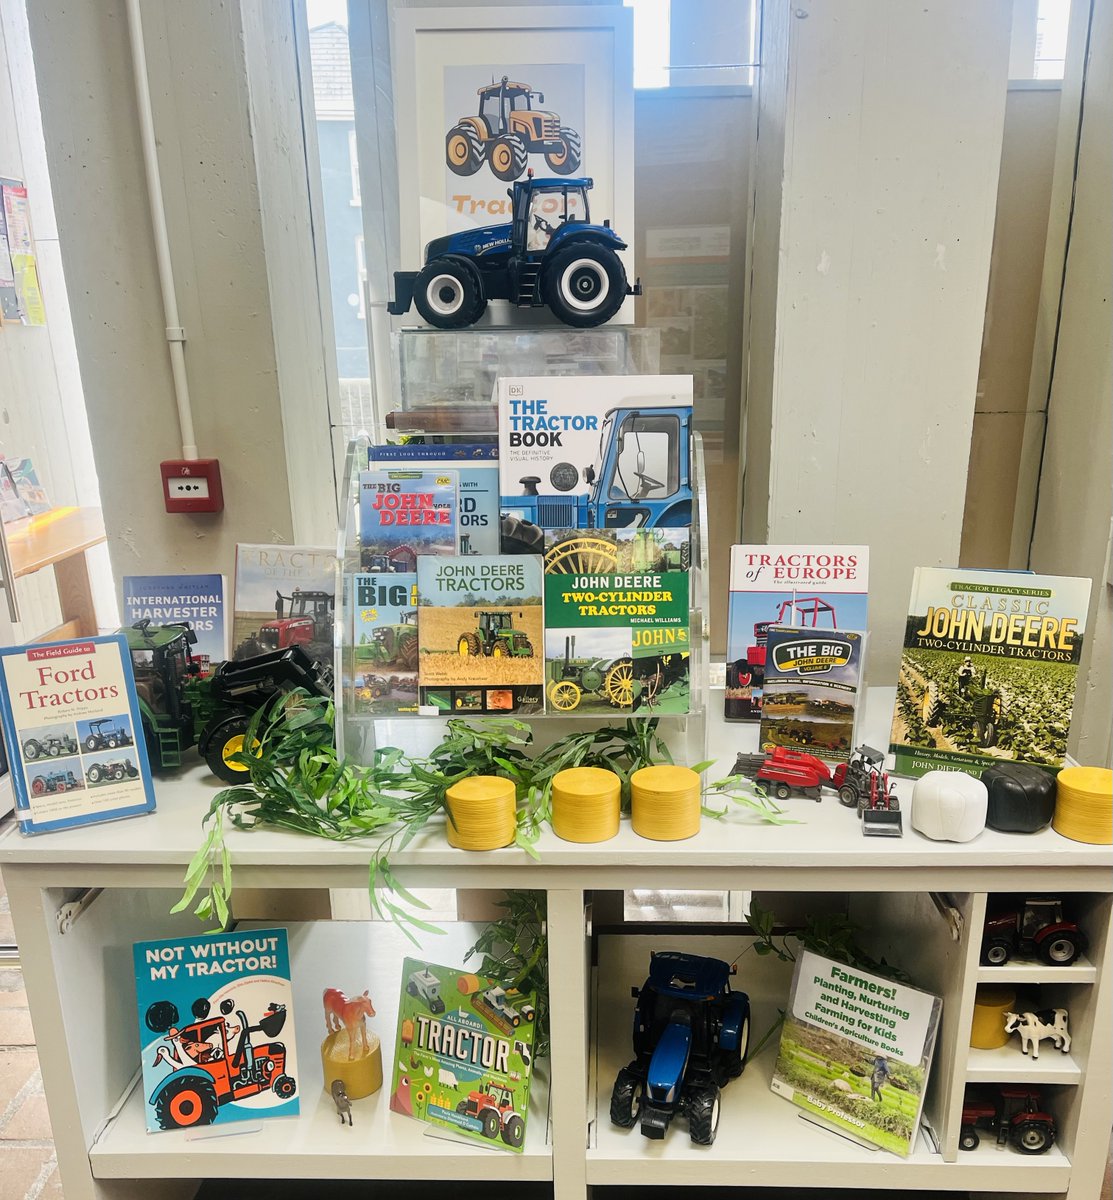 They might not be any fun to drive behind, but this Tractor books display at # Bantry library will certainly brighten your day !
#bantrylibrary #WhatLibrariesDo @CorkCountyArts